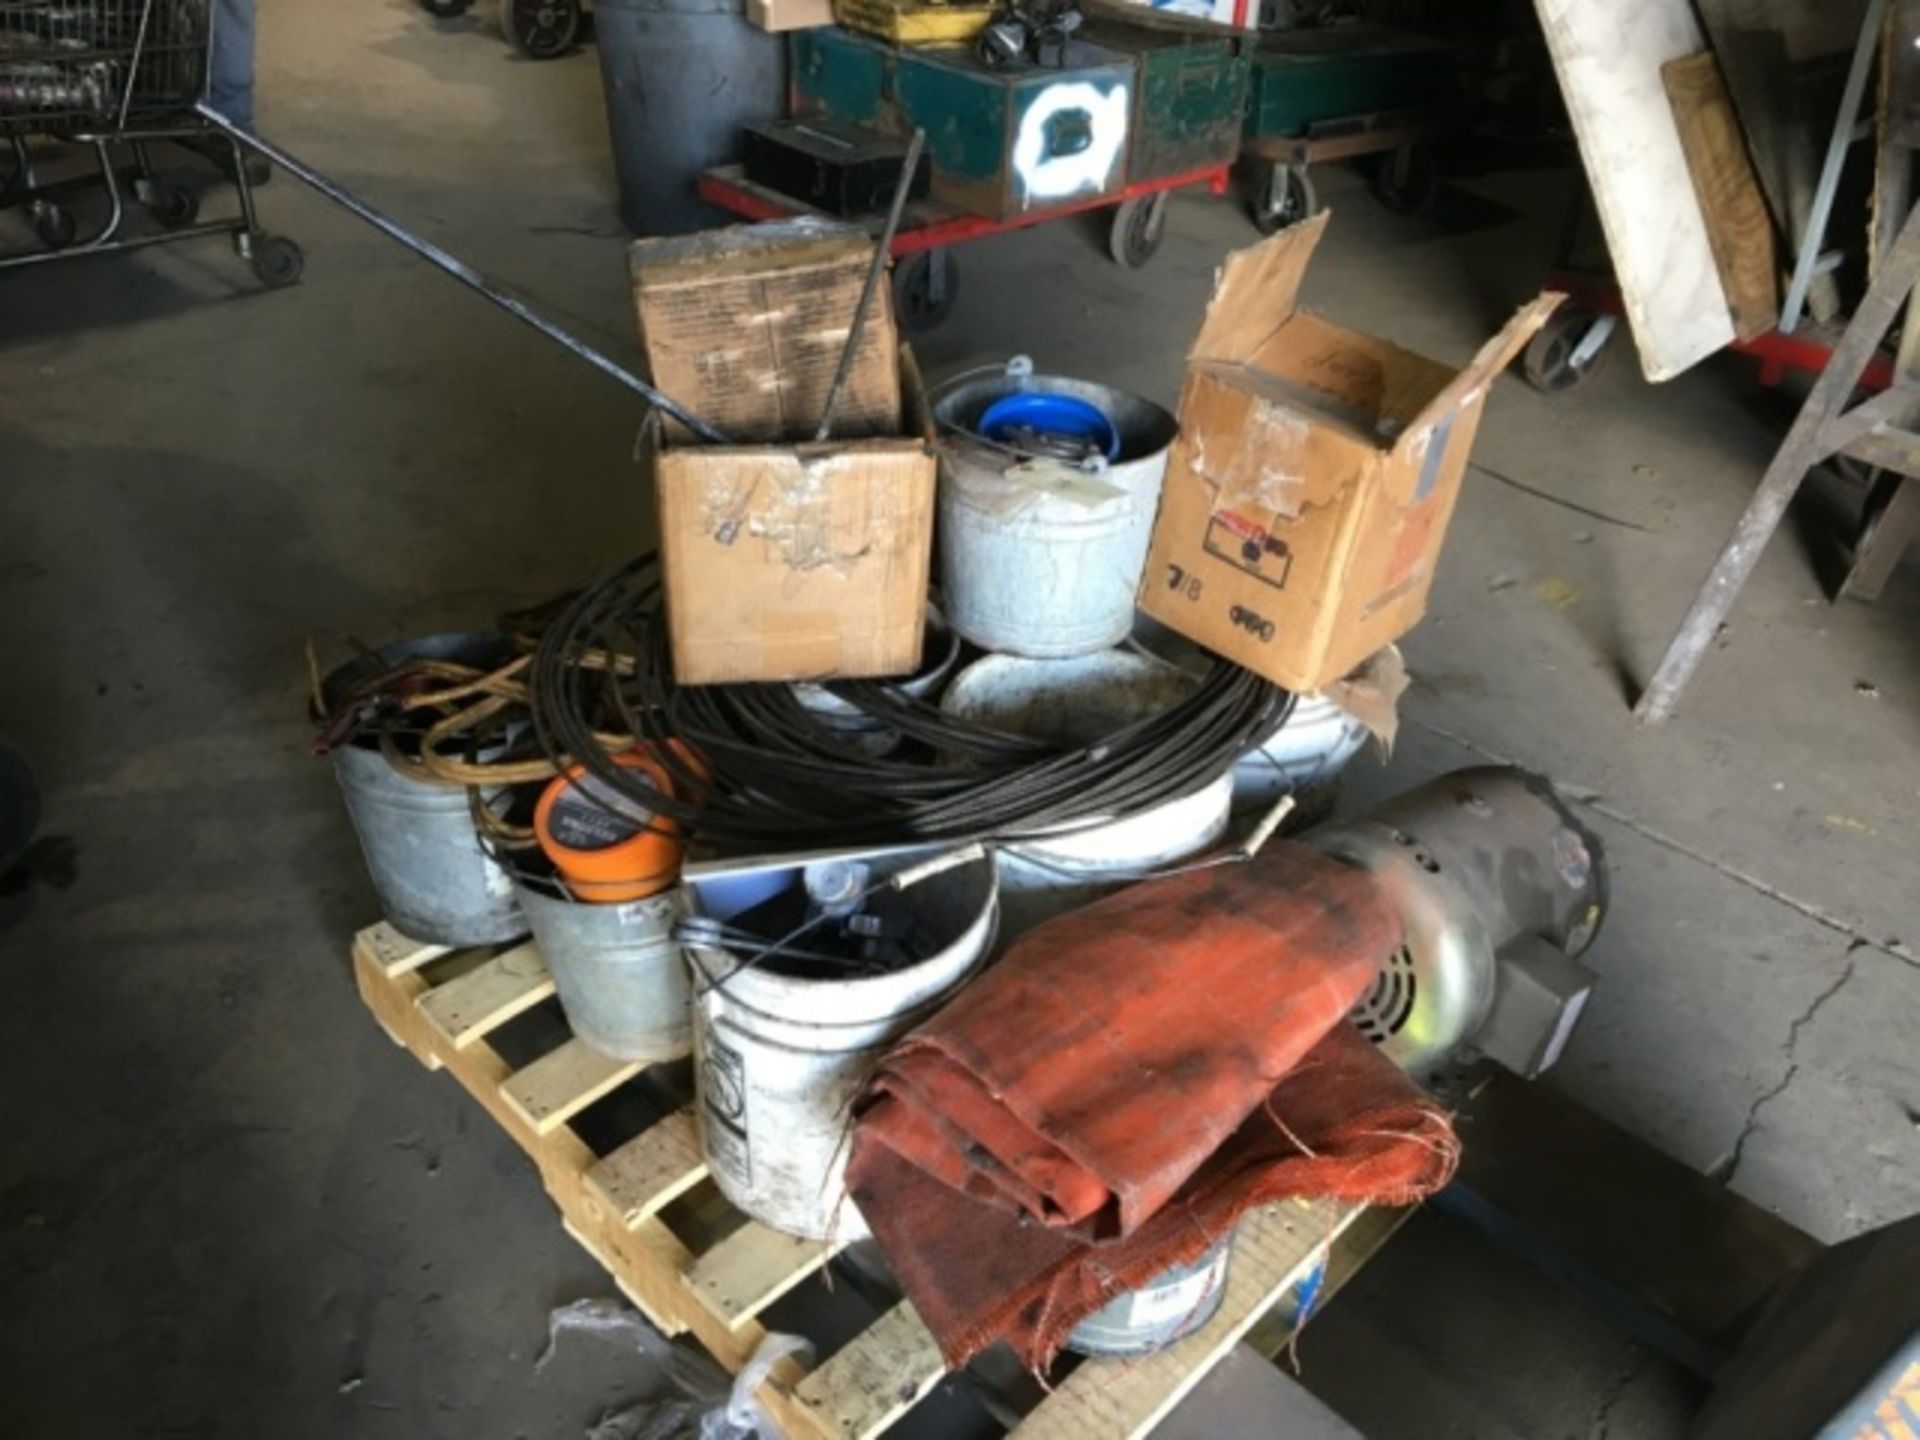 Pallet lot of shop items - chains, motor and more